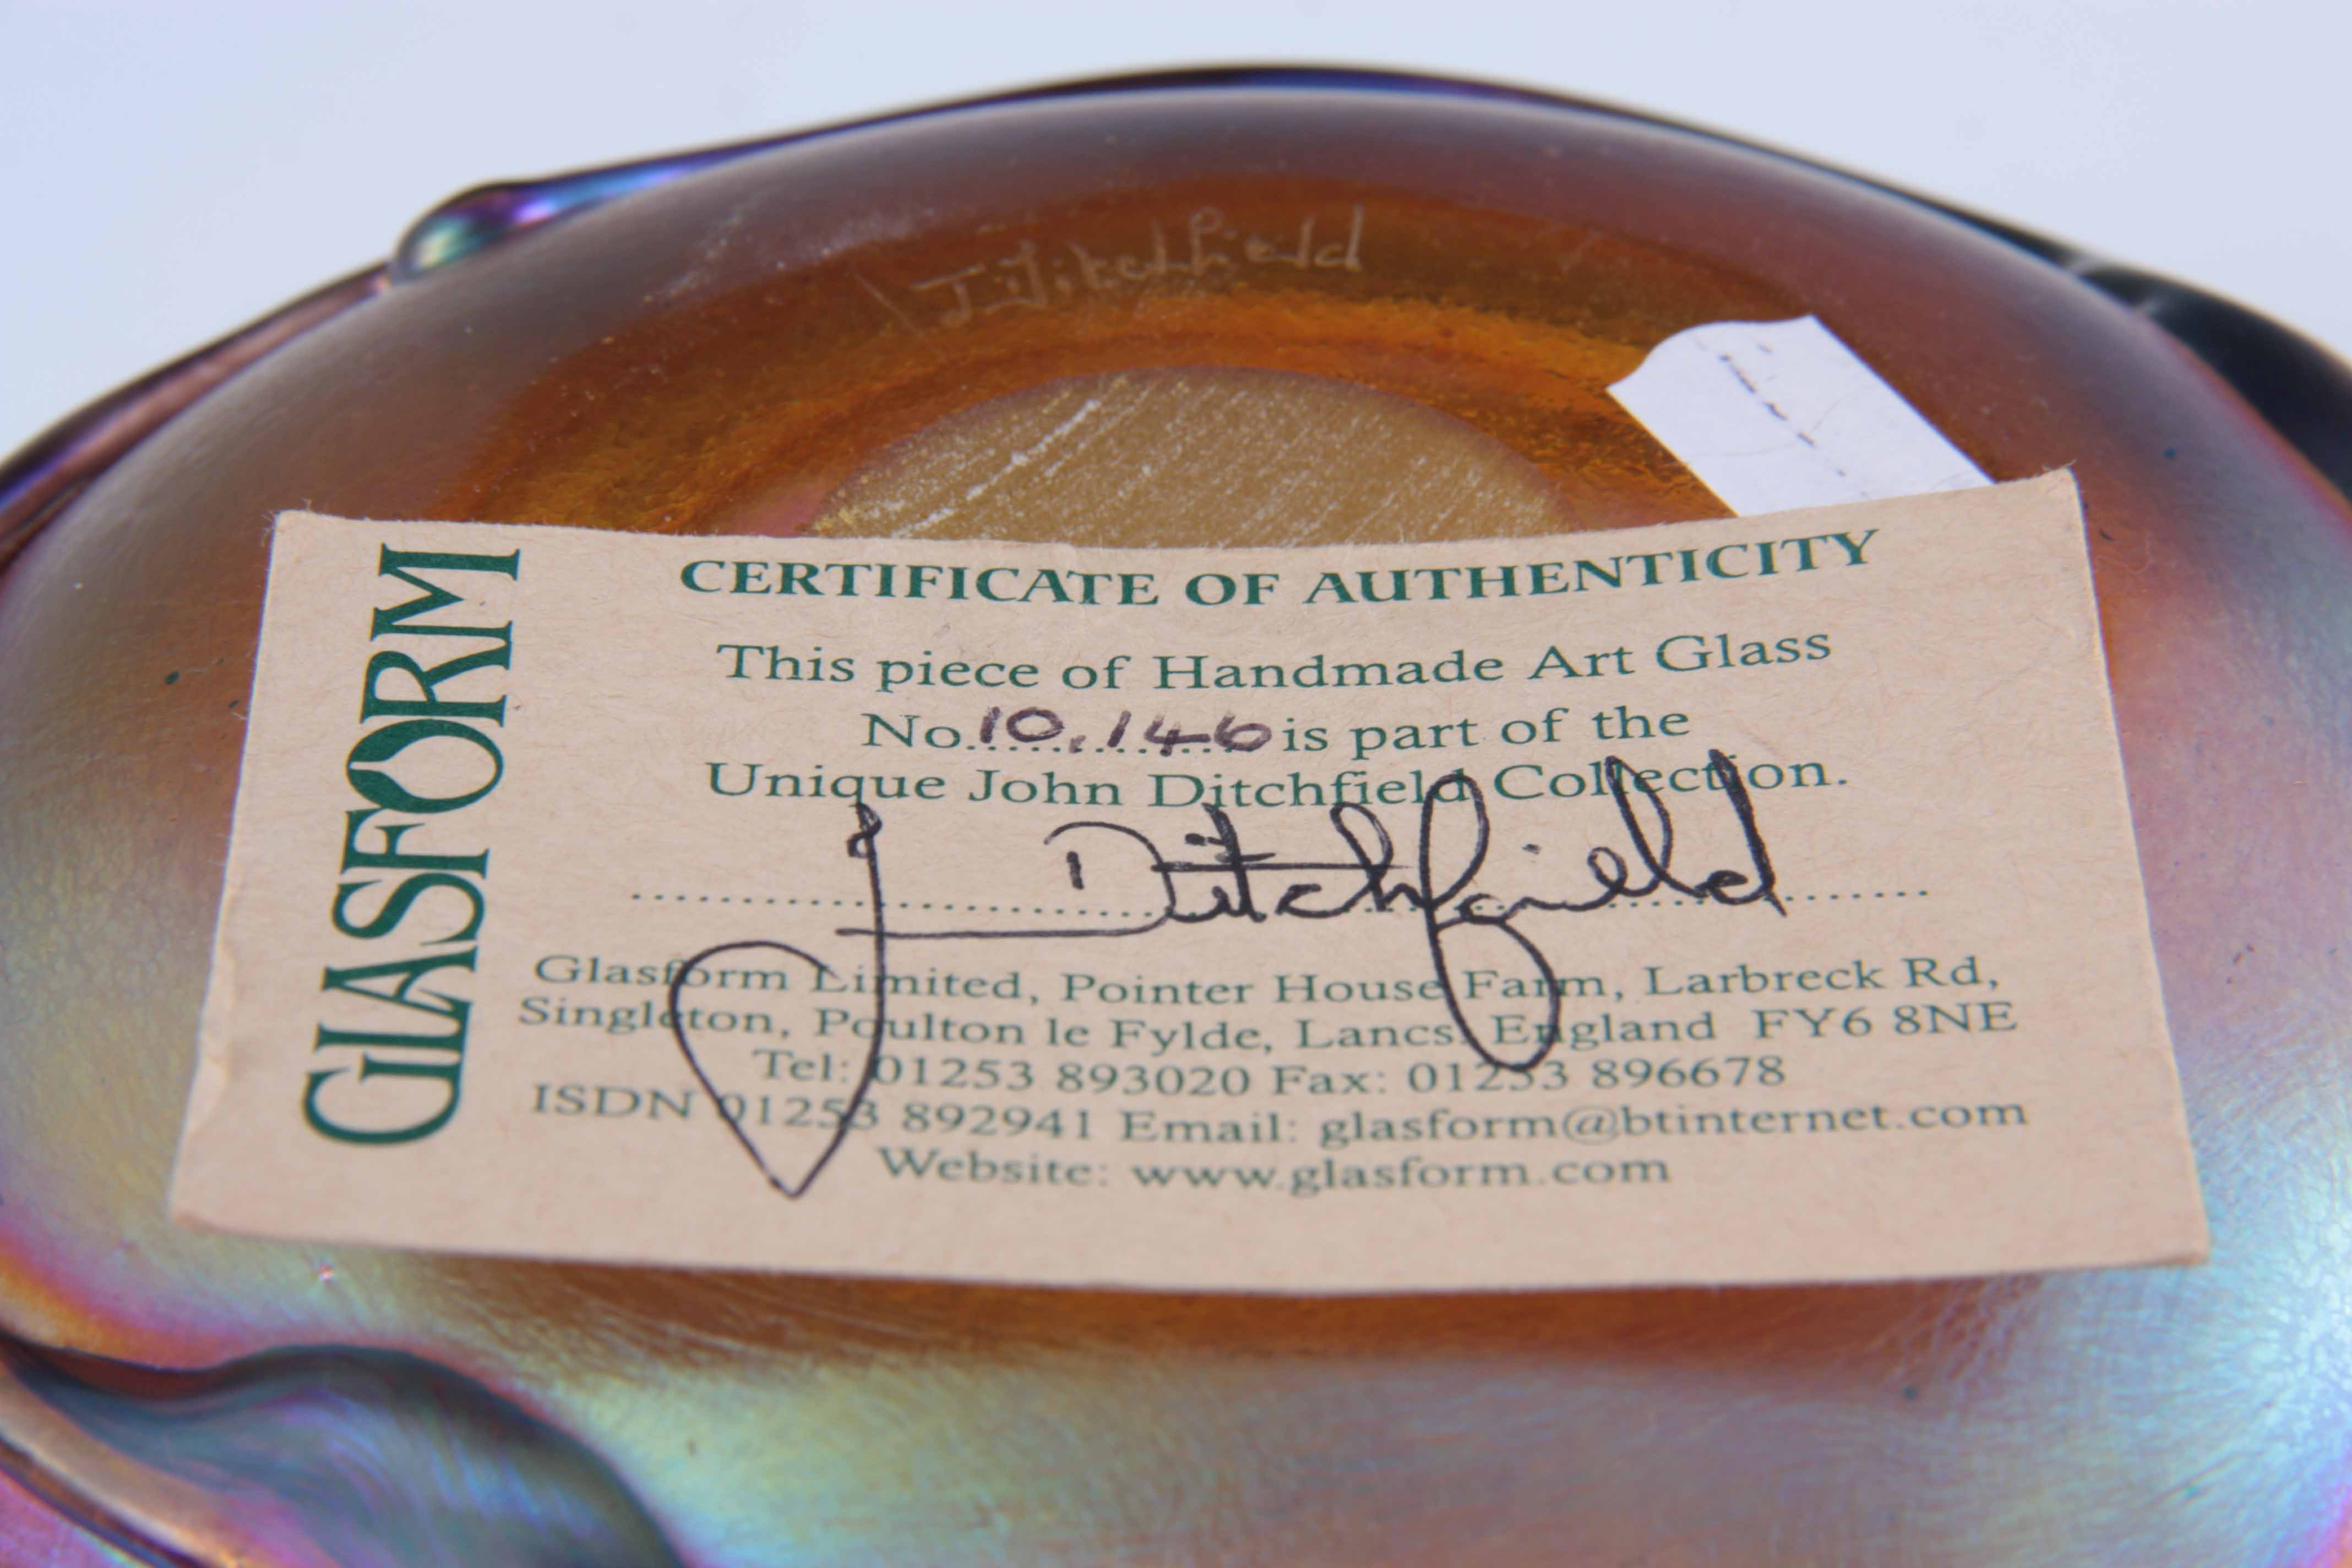 A LATE 20TH CENTURY JOHN DITCHFIELD GLASS FORM IRIDESCENT GLASS BOWL, signed and numbered, with - Image 6 of 6